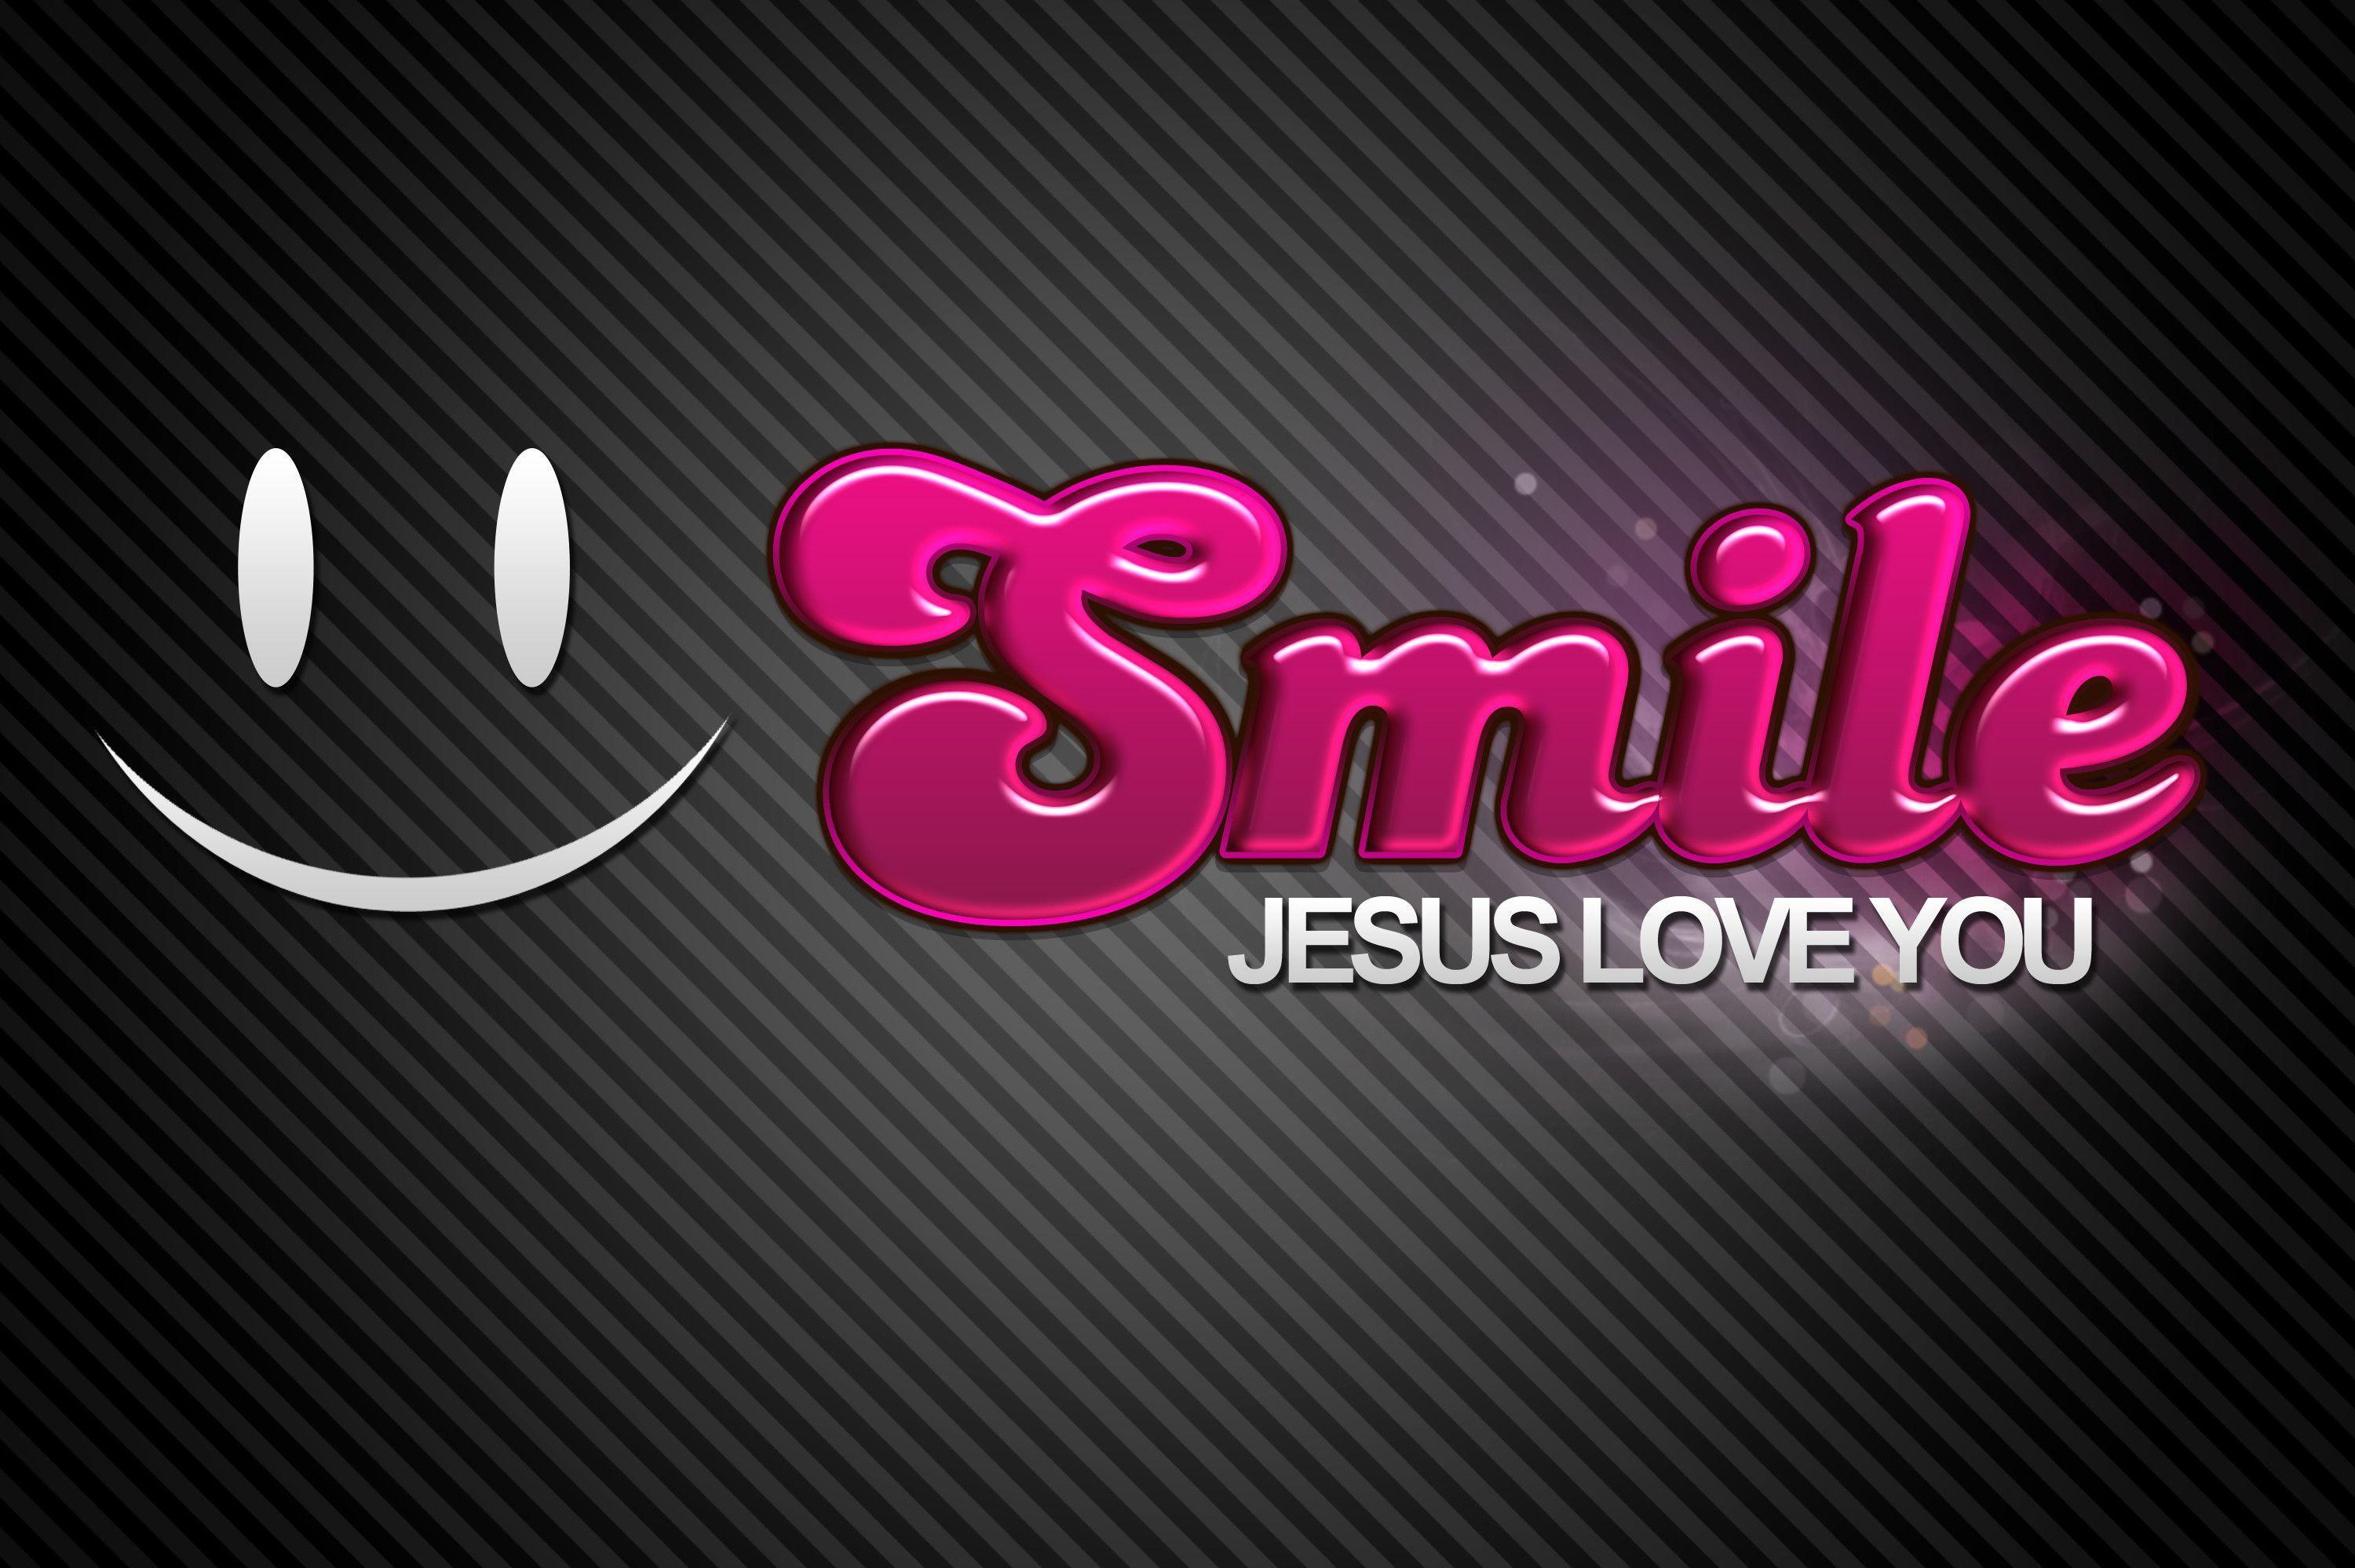 Jesus Loves Me Android Apps on Google Play. HD Wallpaper